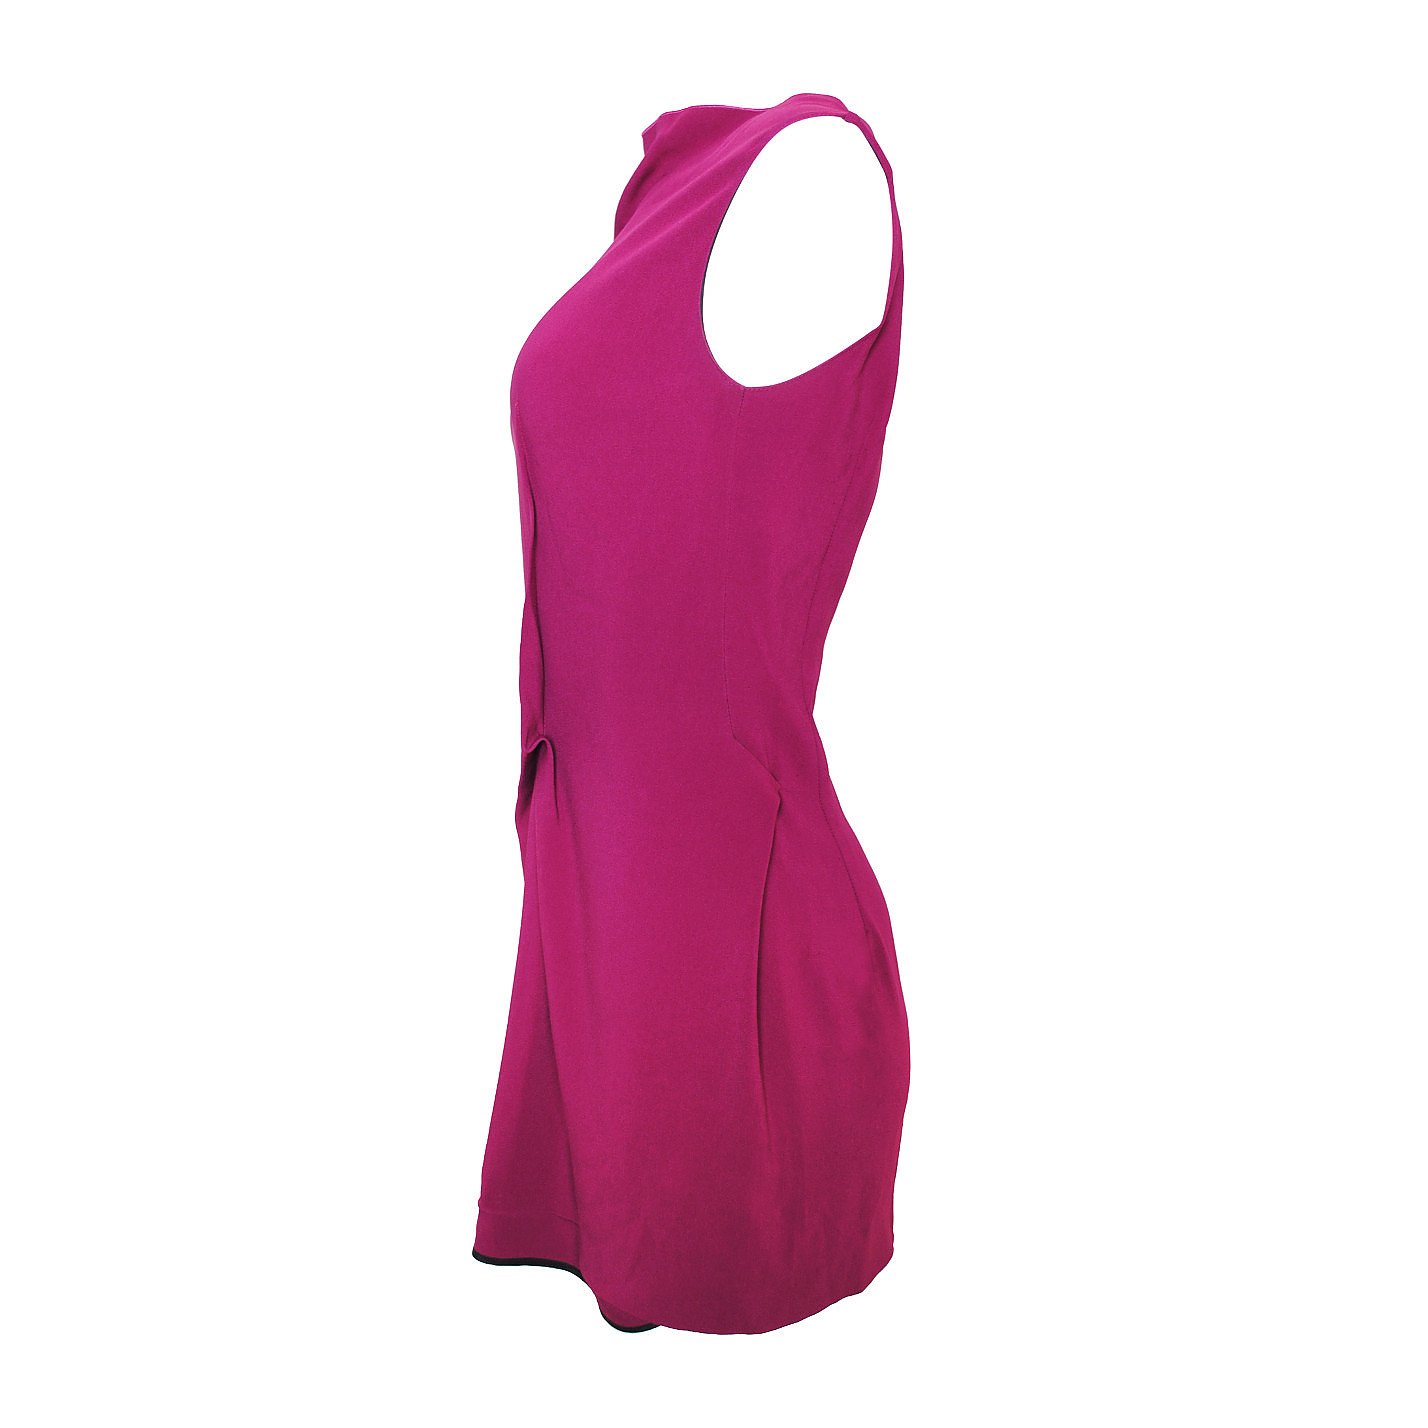 RM by Roland Mouret Darted Sleeveless Dress